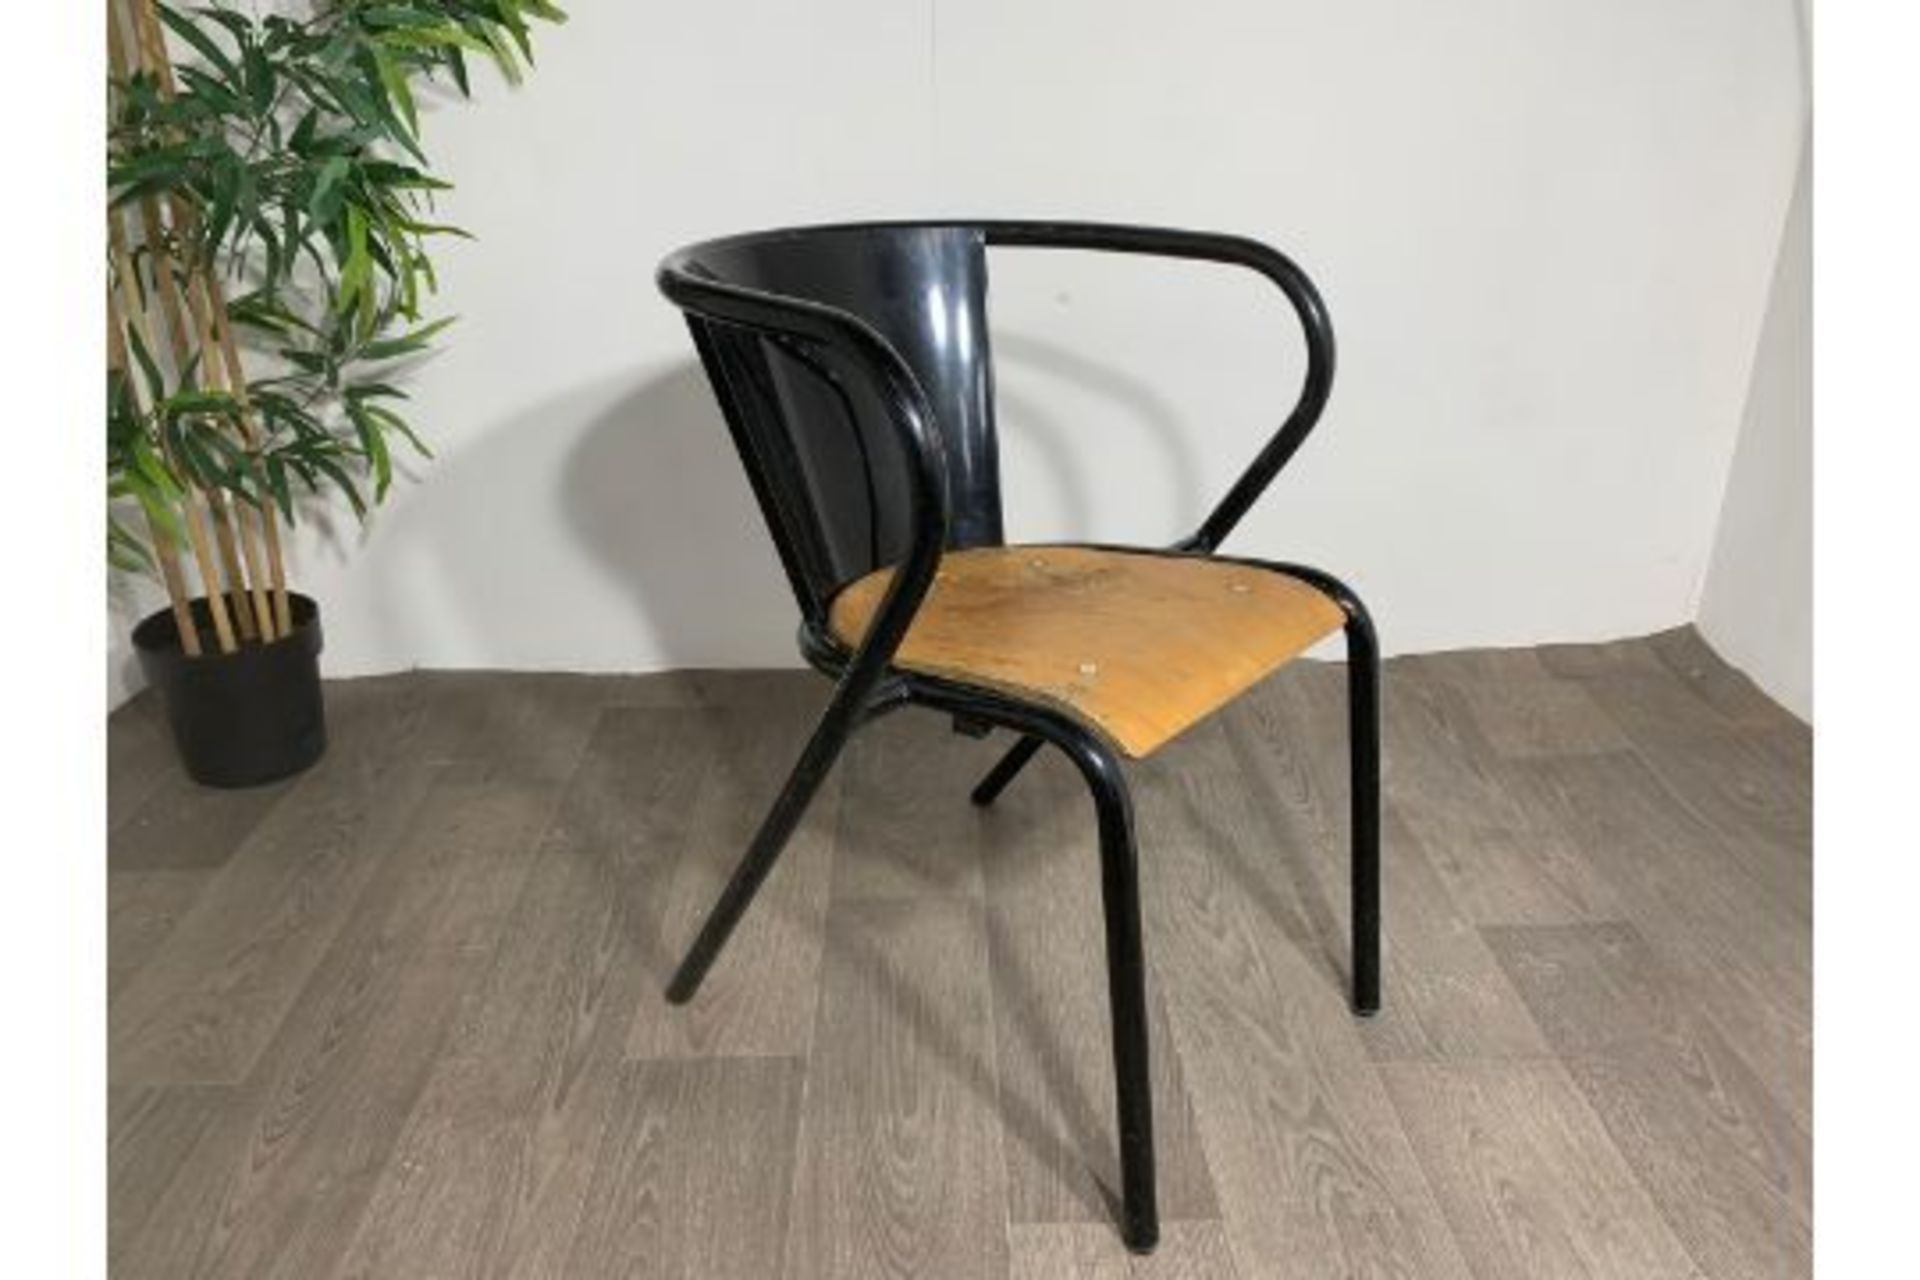 Adico 5008 Black Chair With Wooden Seat x2 - Image 3 of 4